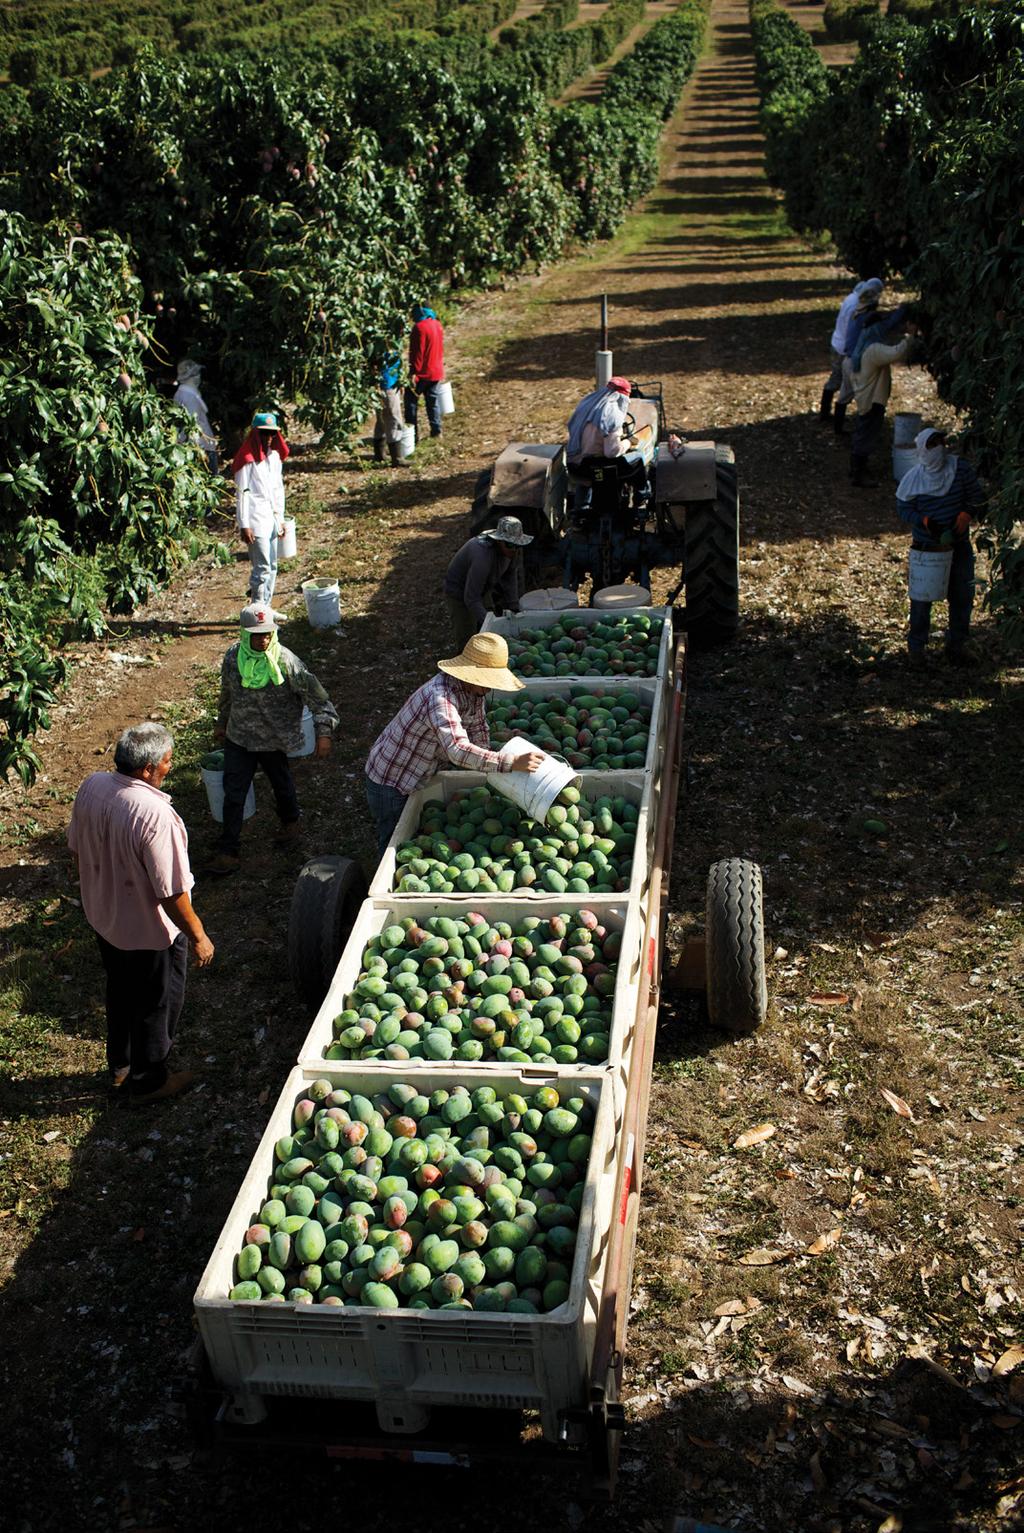 From Tree to Table At sunrise, a team of workers begins harvesting mangos, handpicking the fruit into buckets and then filling large crates pulled behind farm tractors.